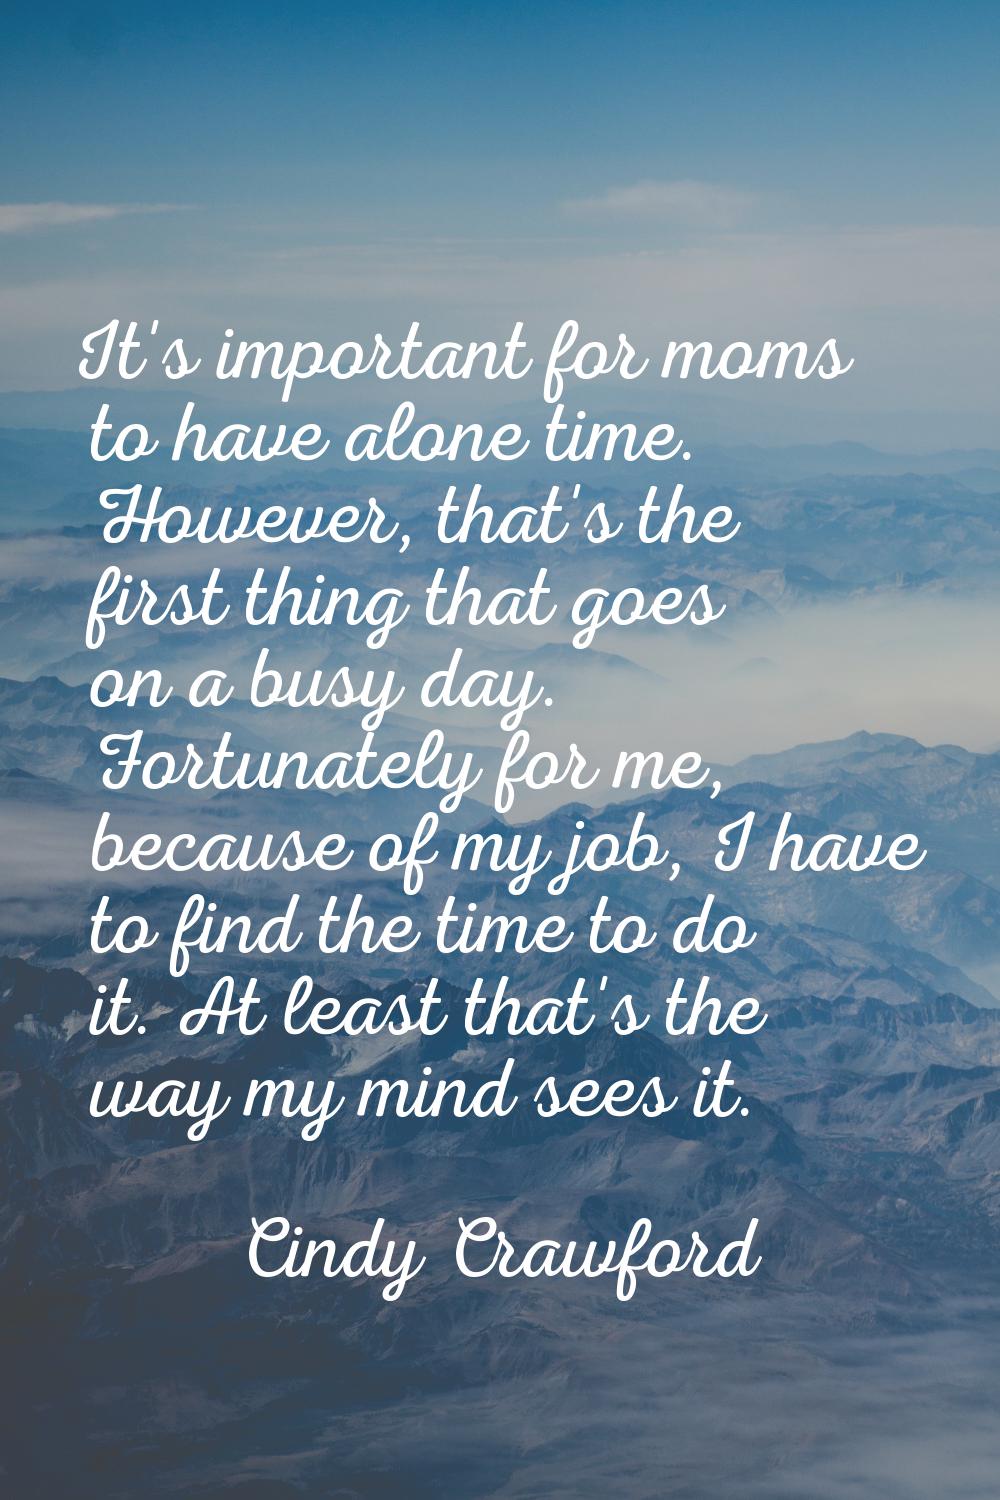 It's important for moms to have alone time. However, that's the first thing that goes on a busy day